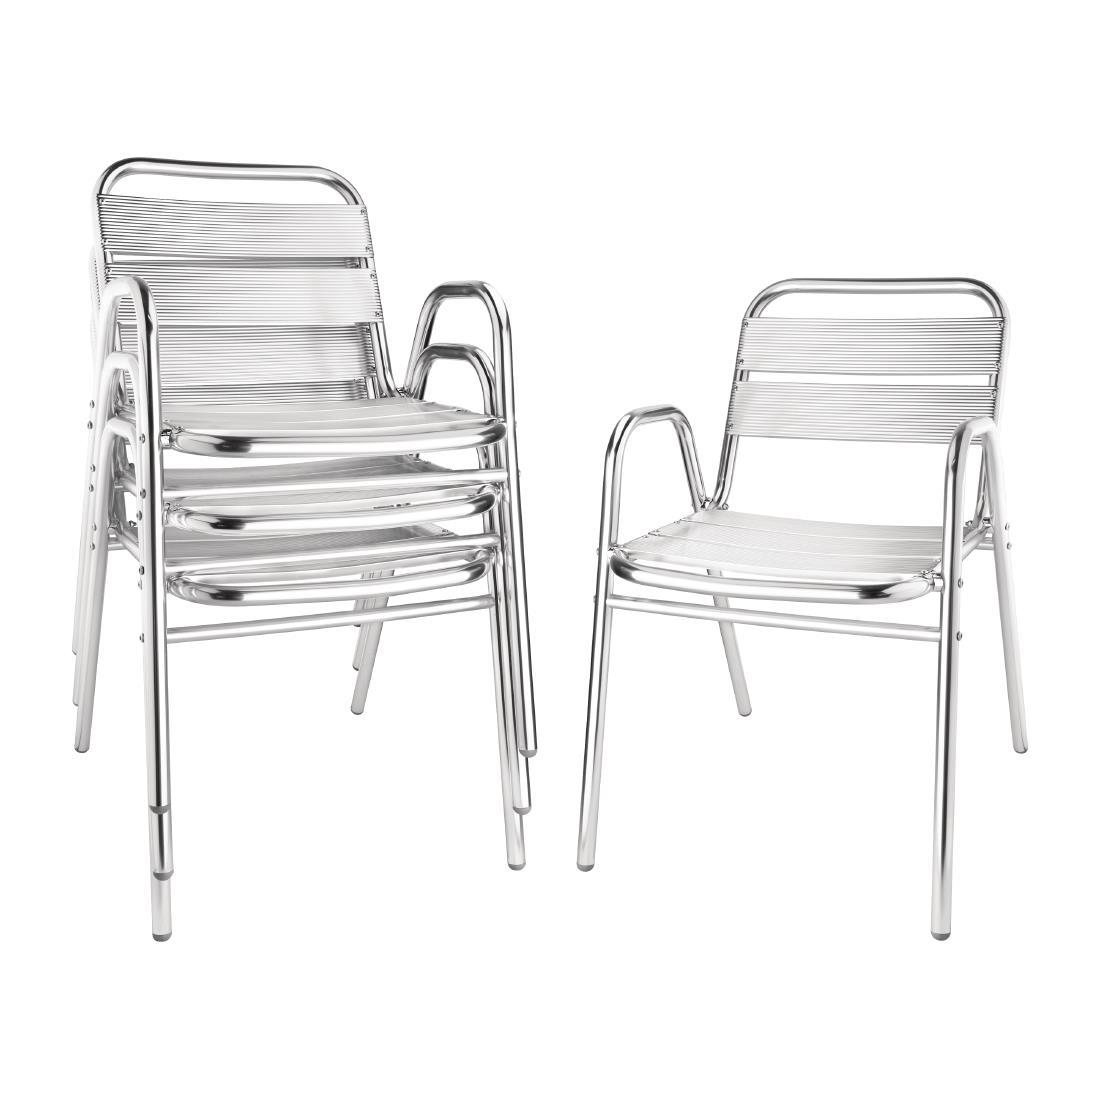 Bolero Aluminium Stacking Chairs Arched Arms (Pack of 4) - U501  - 5